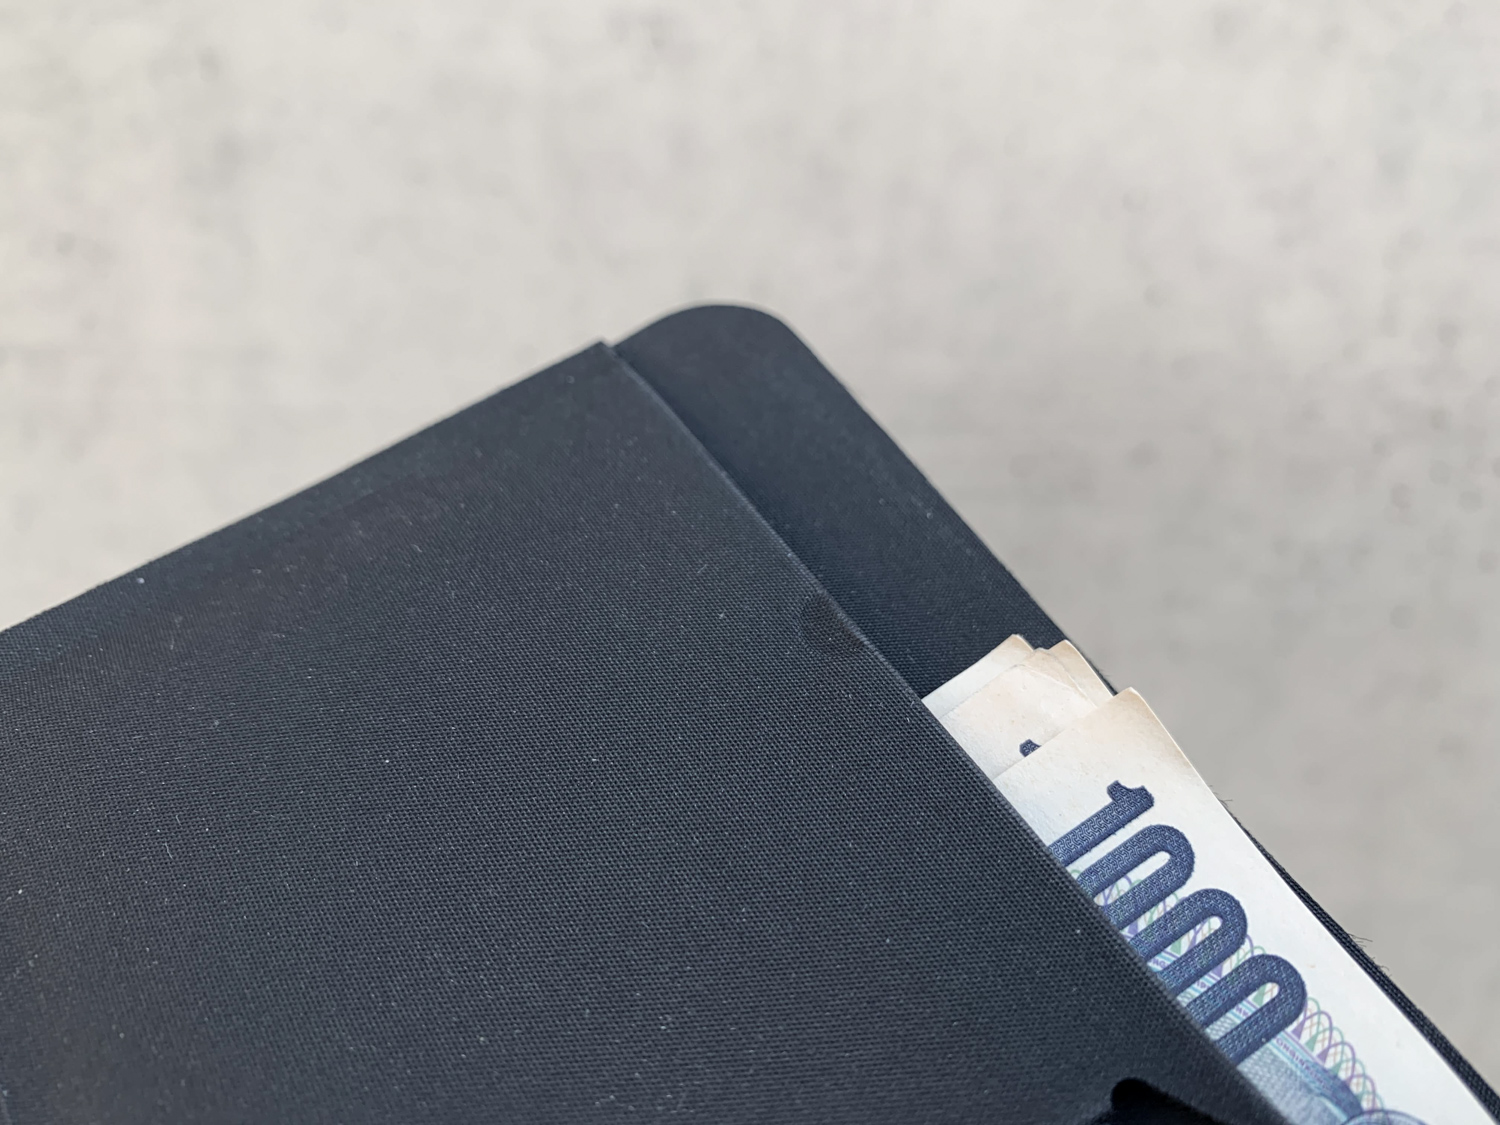 A bifold wallet that can hold an air ticket.